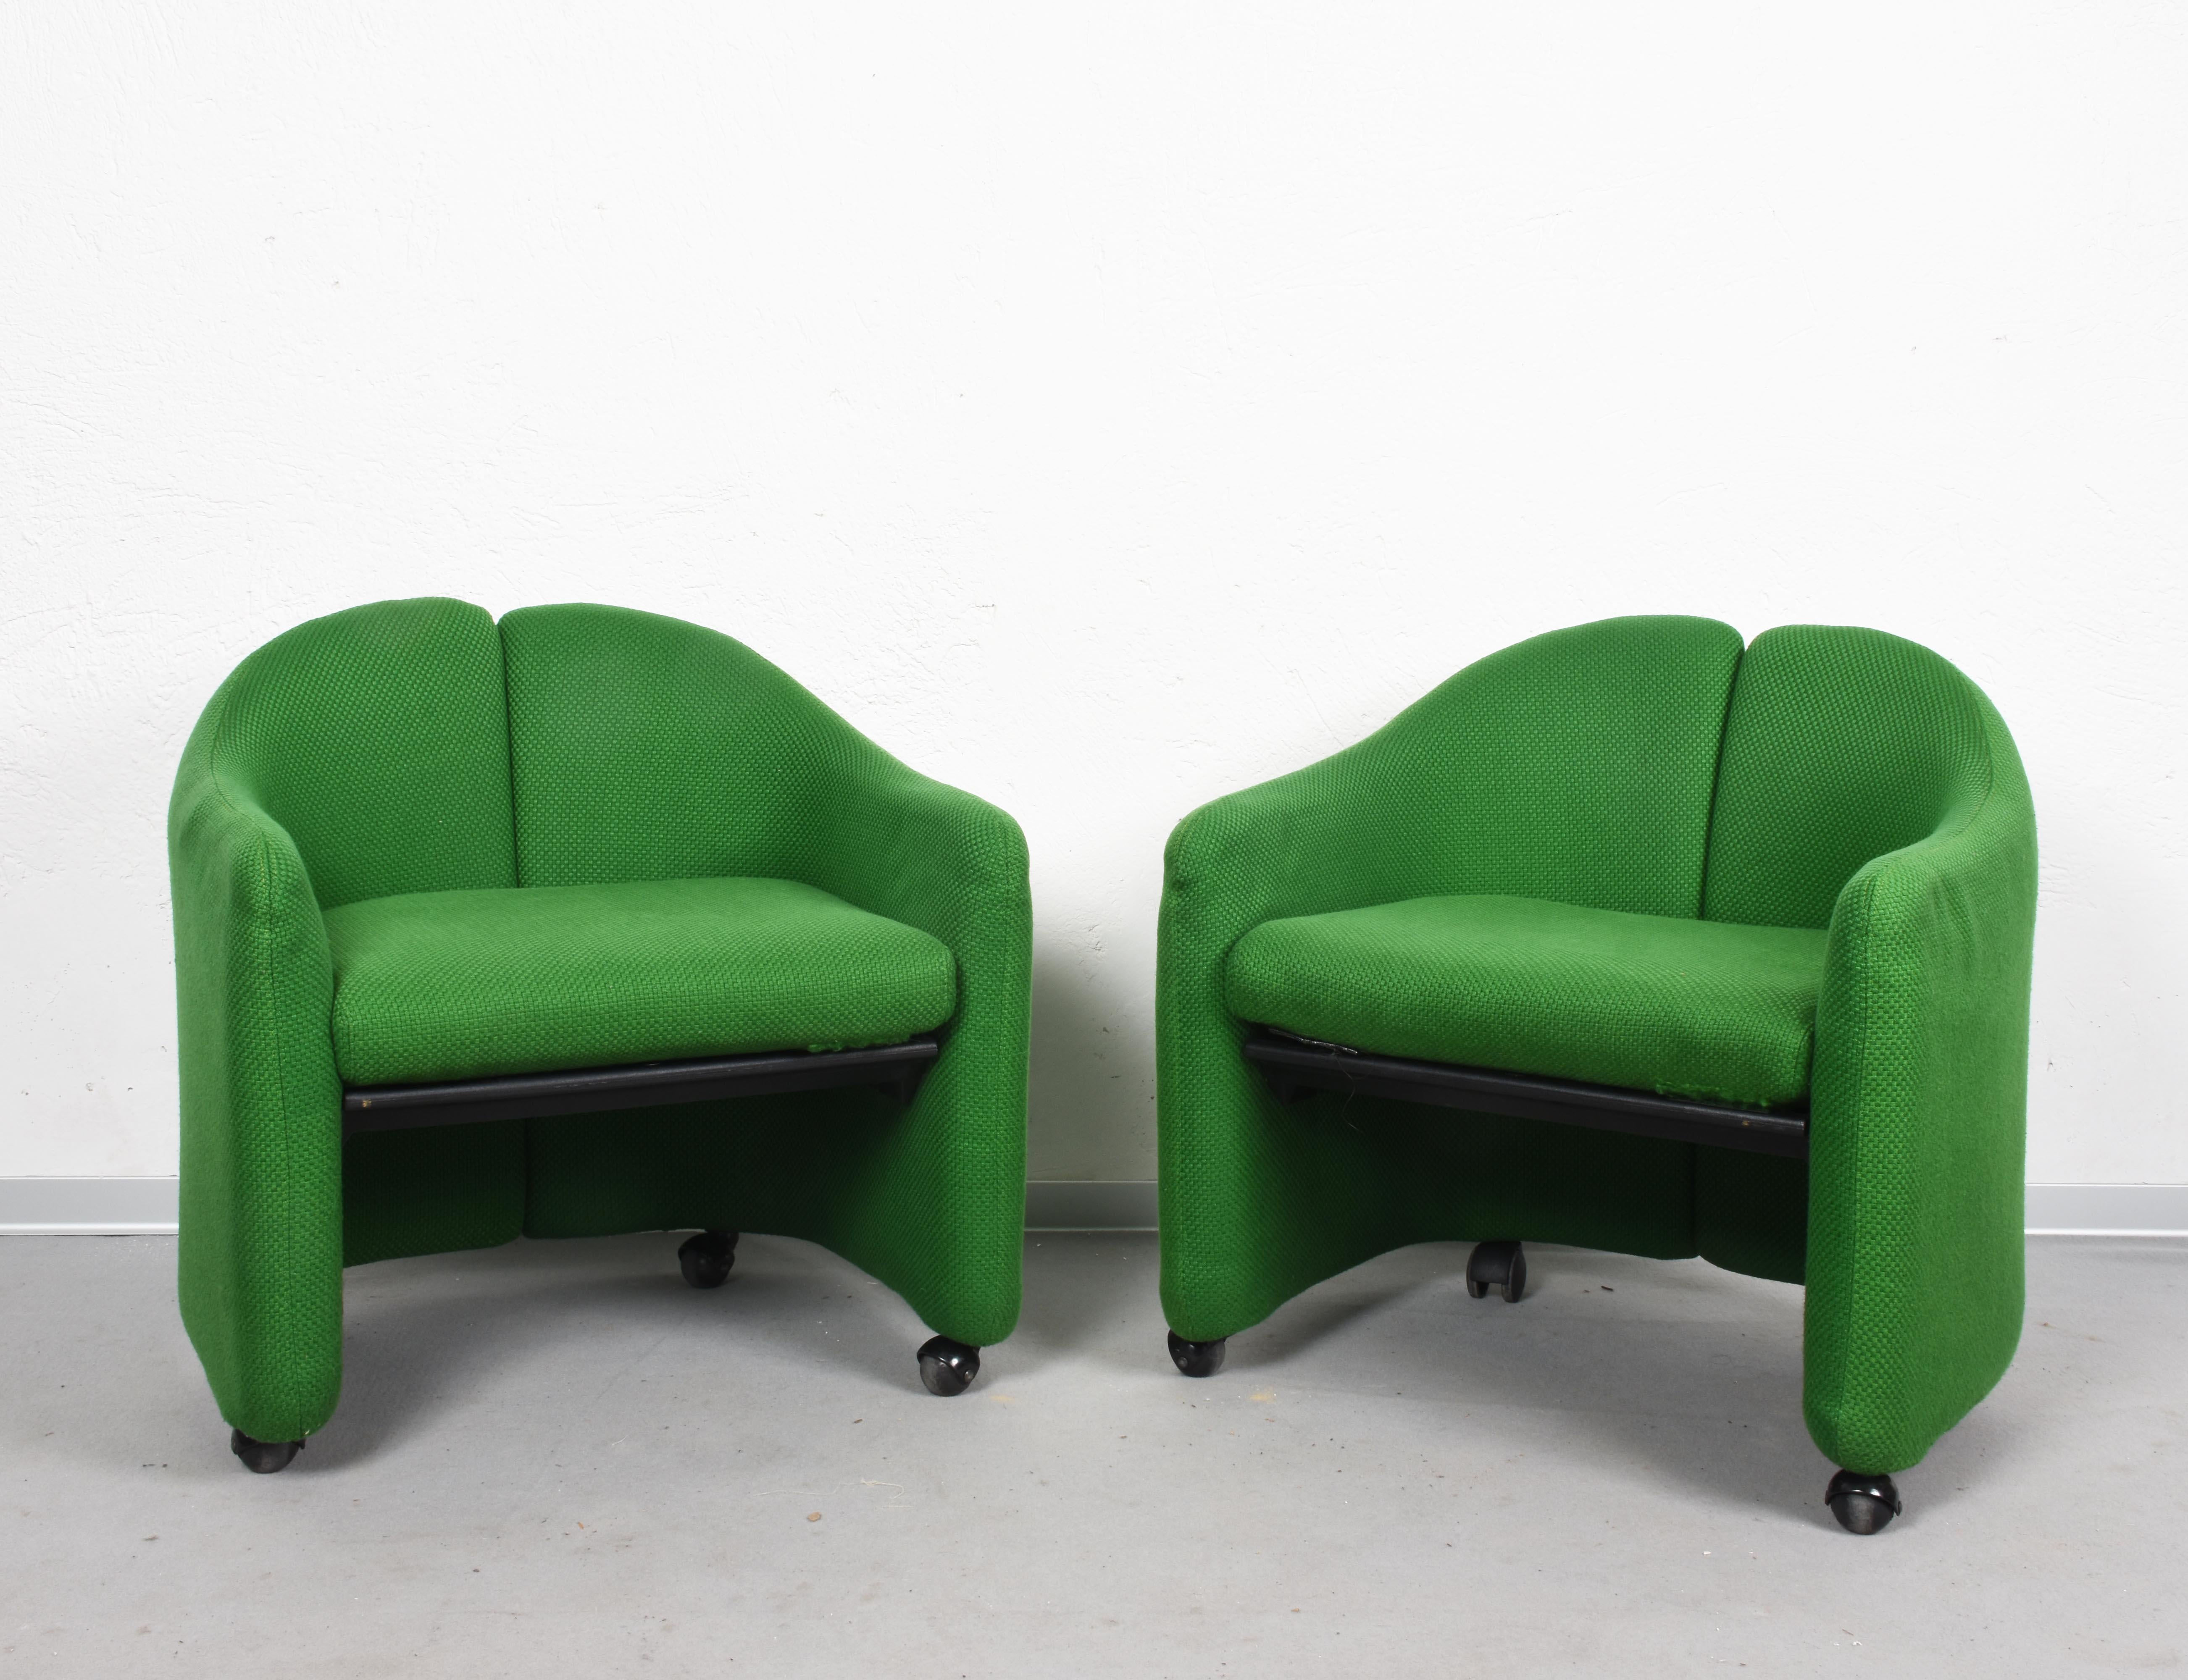 Incredible pair of mid-century green fabric and metal set of two PS142 armchairs. This set was designed by Eugenio Gerli and produced by Tecno in Italy in the 60s.

These splendid armchairs are in excellent vintage condition, with a solid metal